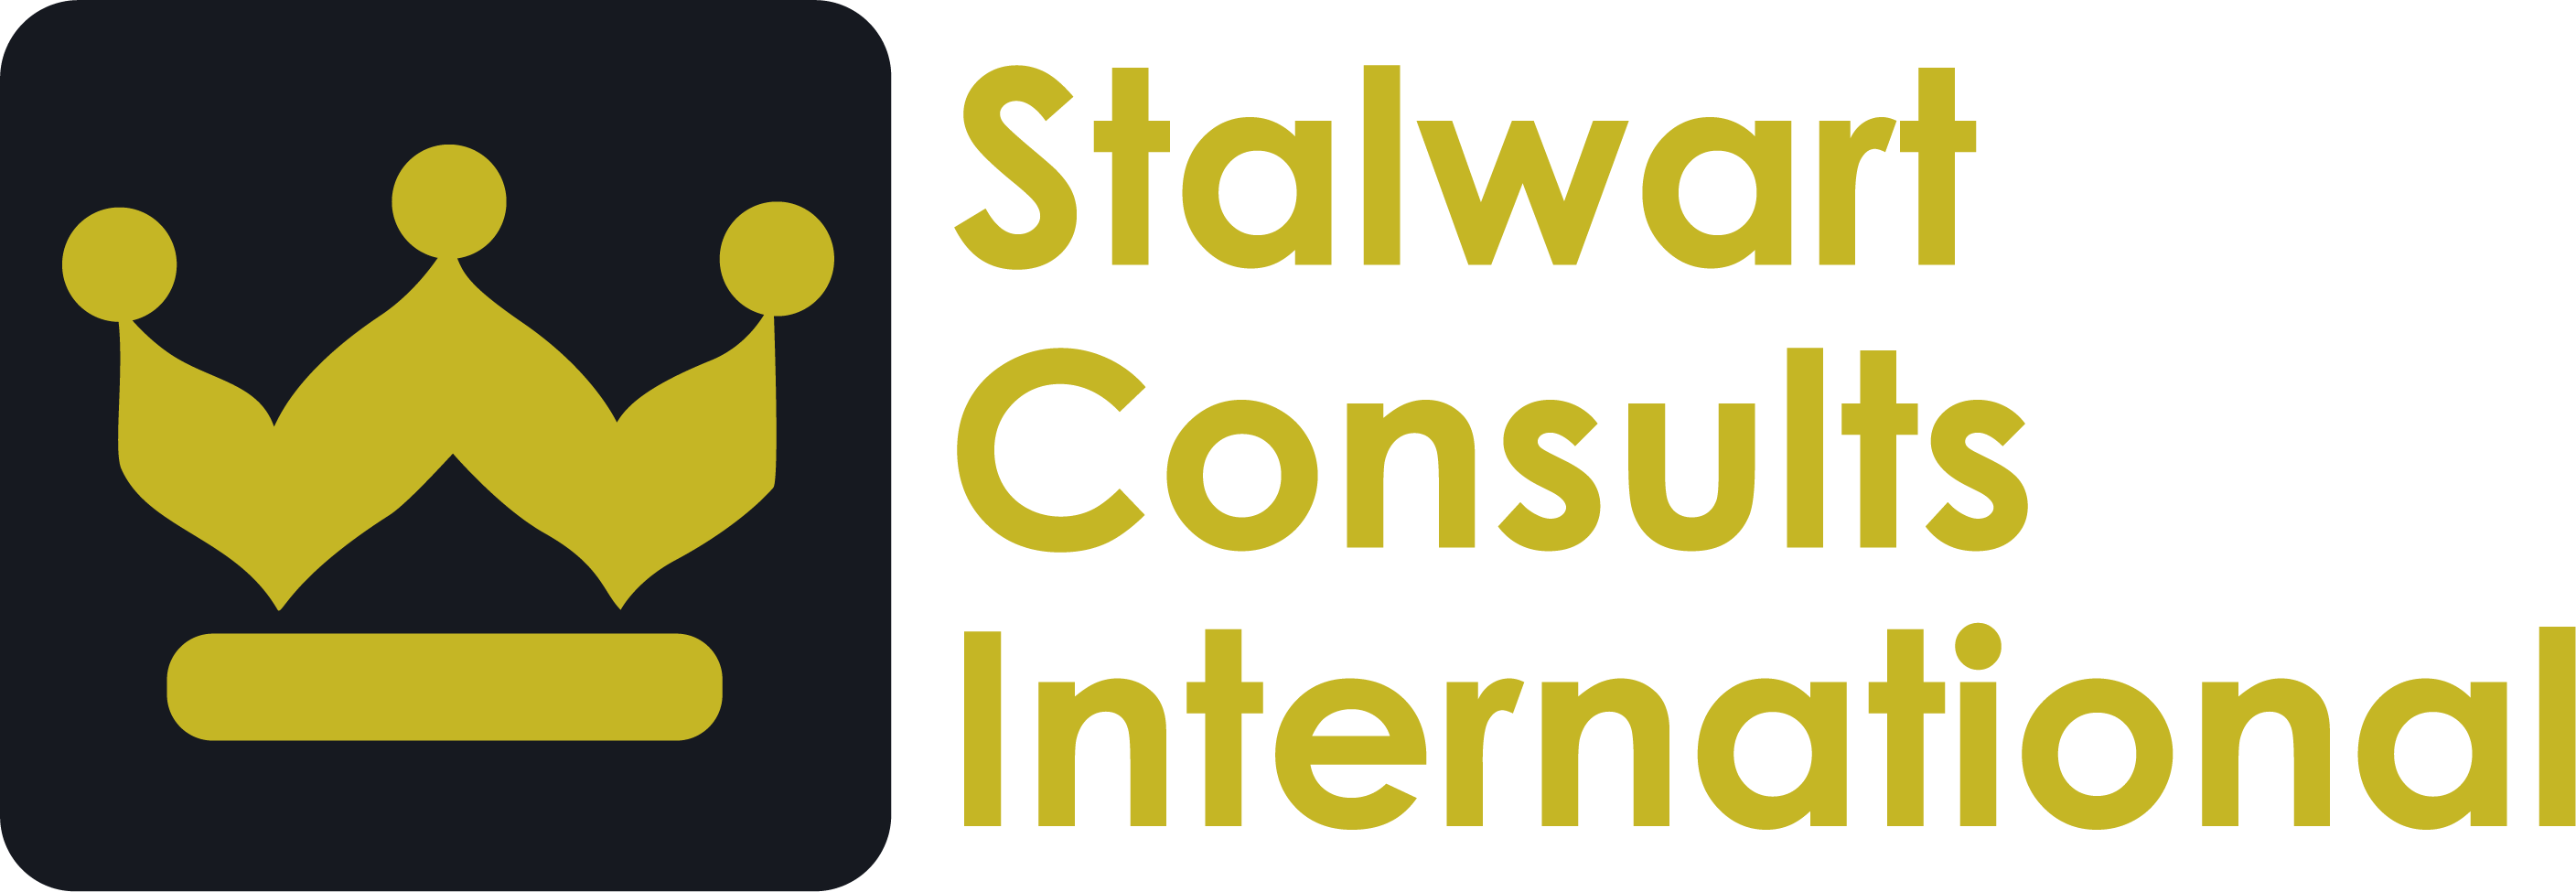 Training & Consulting Services | Stalwart Consults International